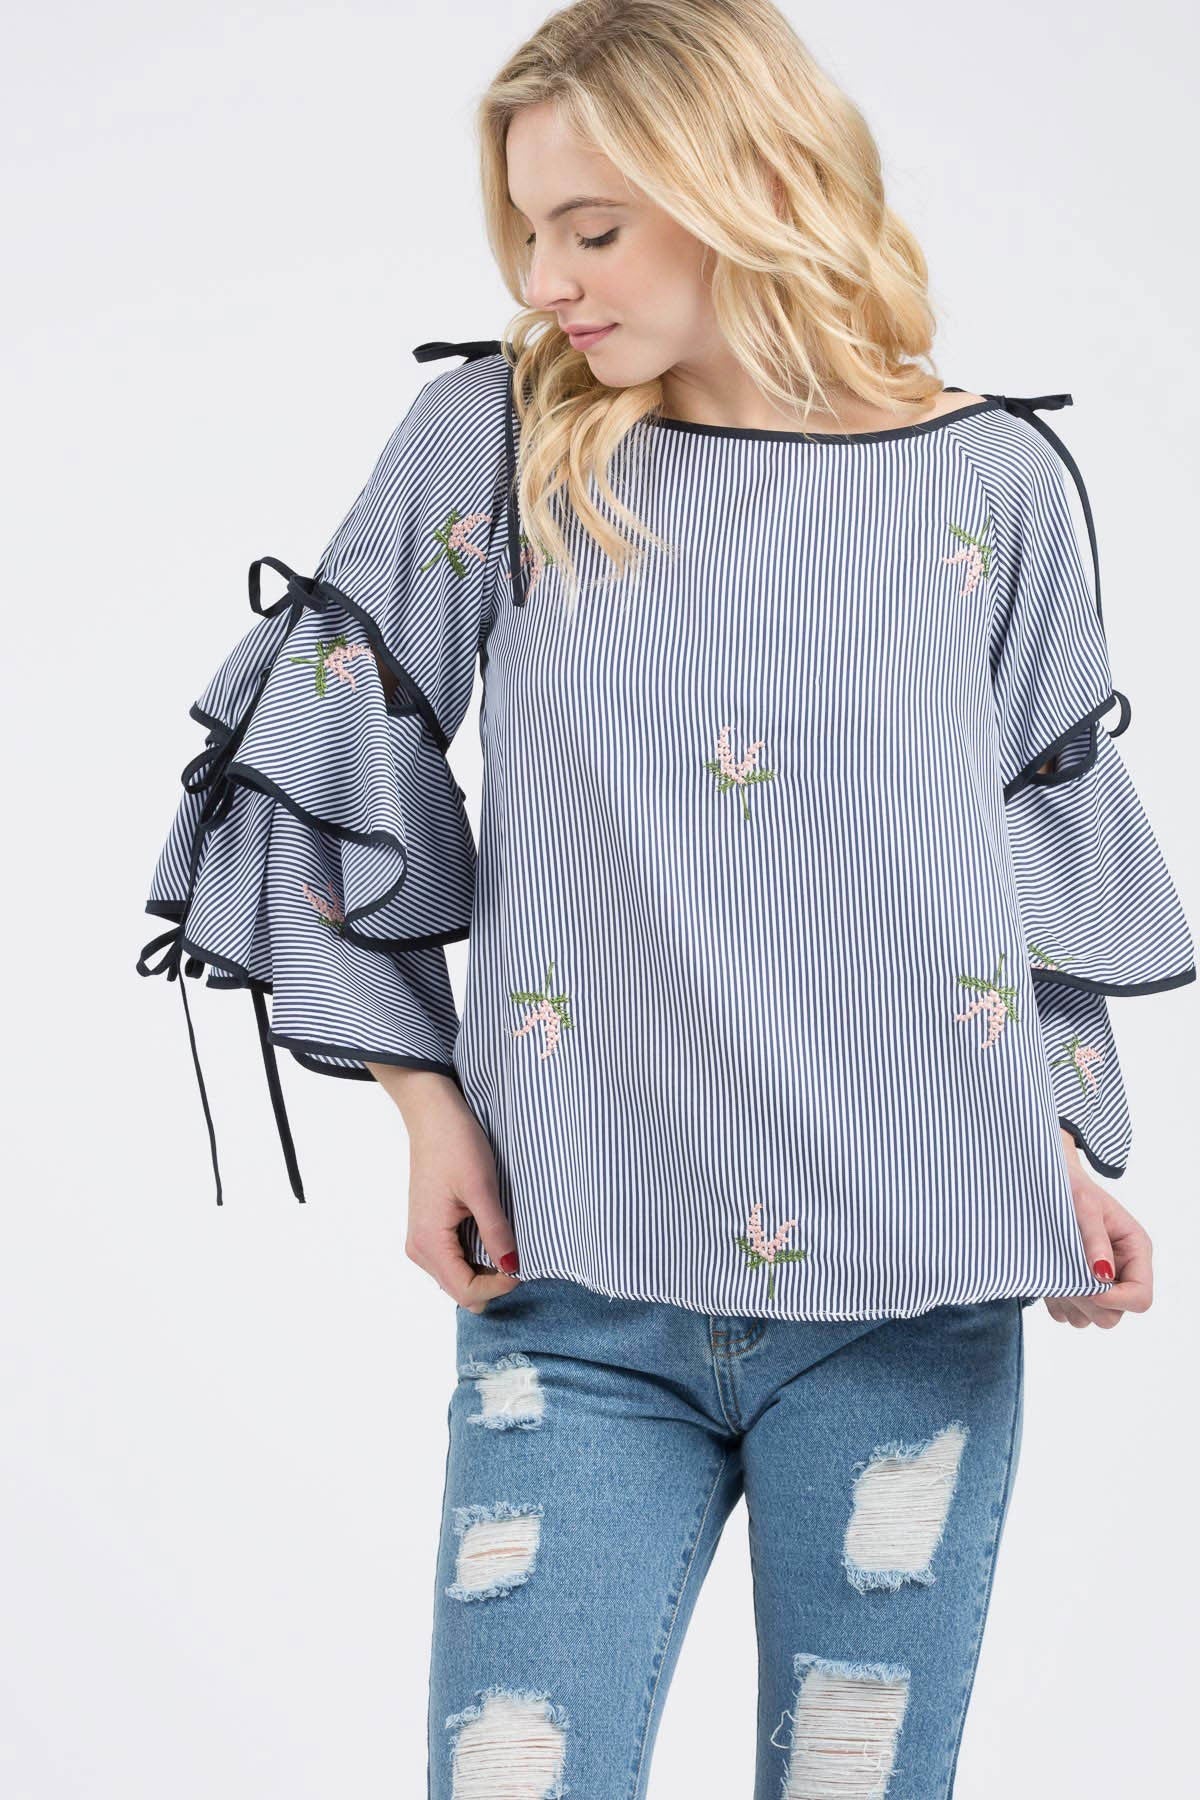 Navy Blue Floral Poplin Print Woven Top With Bell Sleeves - steven wick